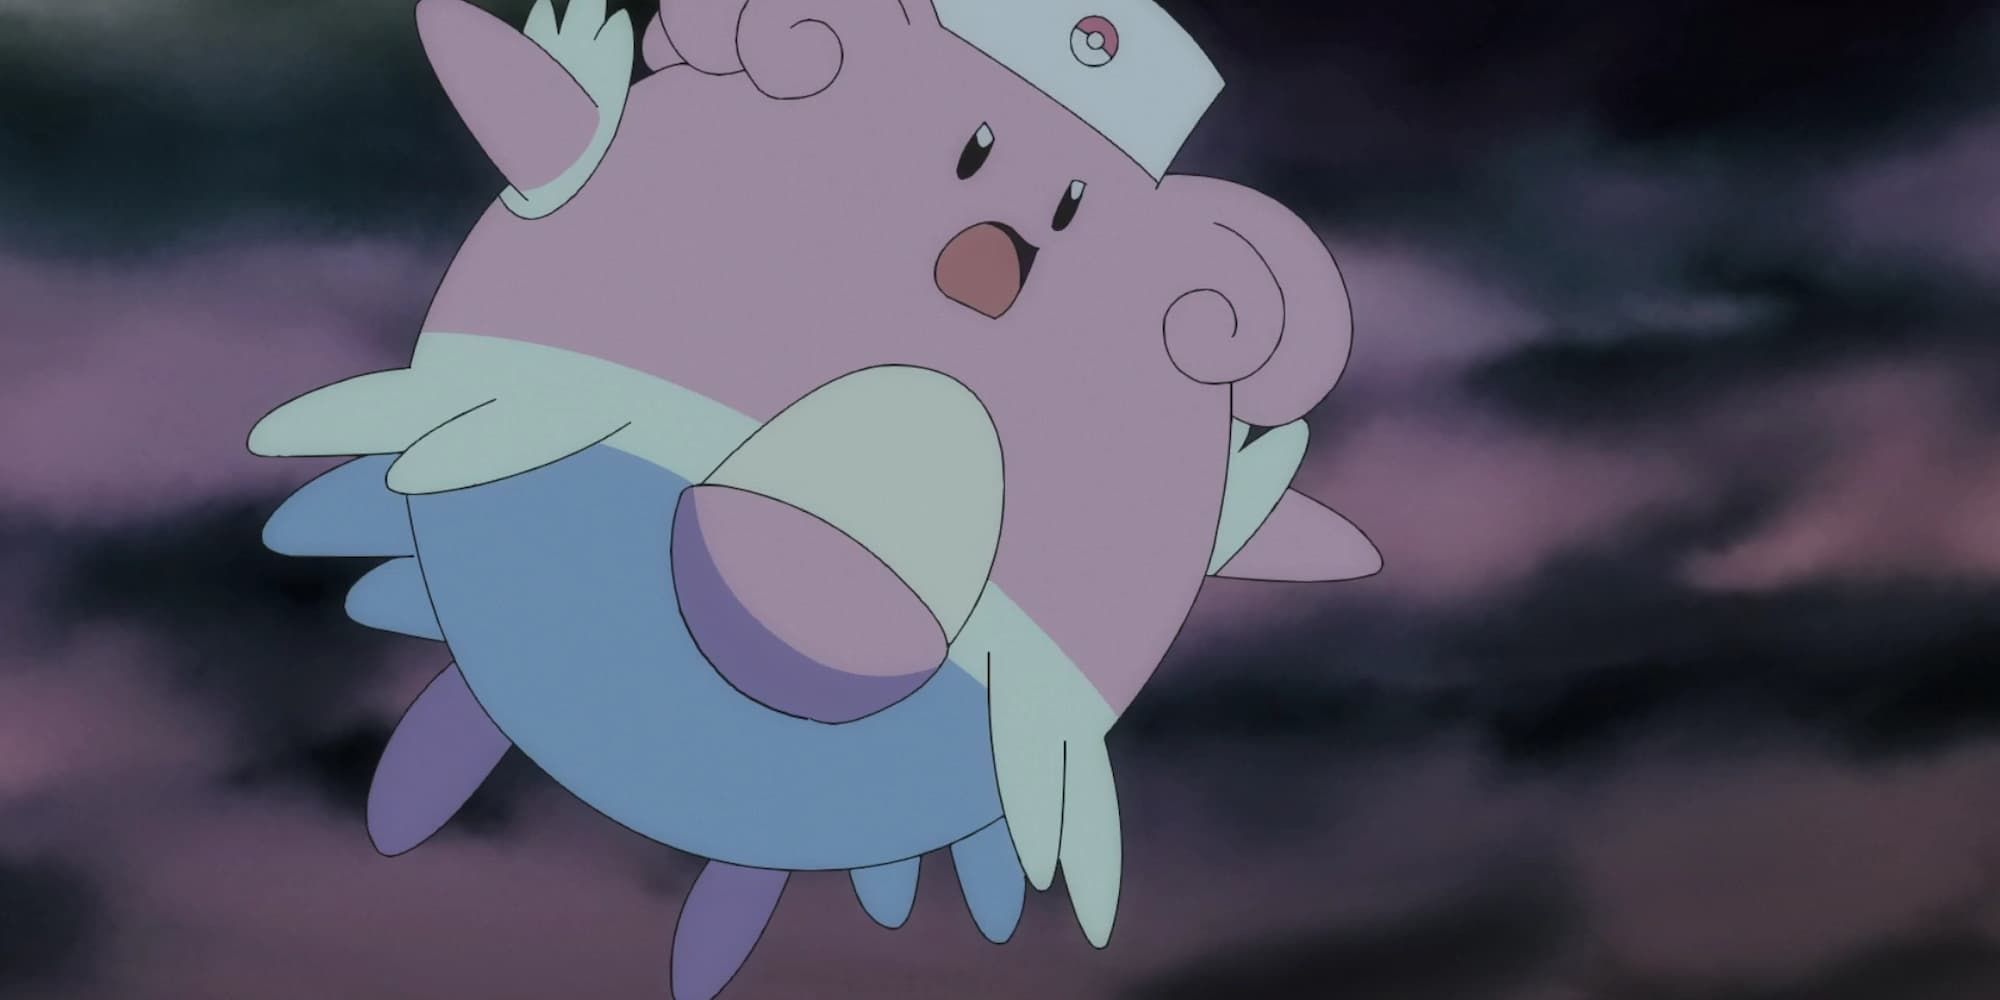 Blissey leaps into action with a determined look on its face.